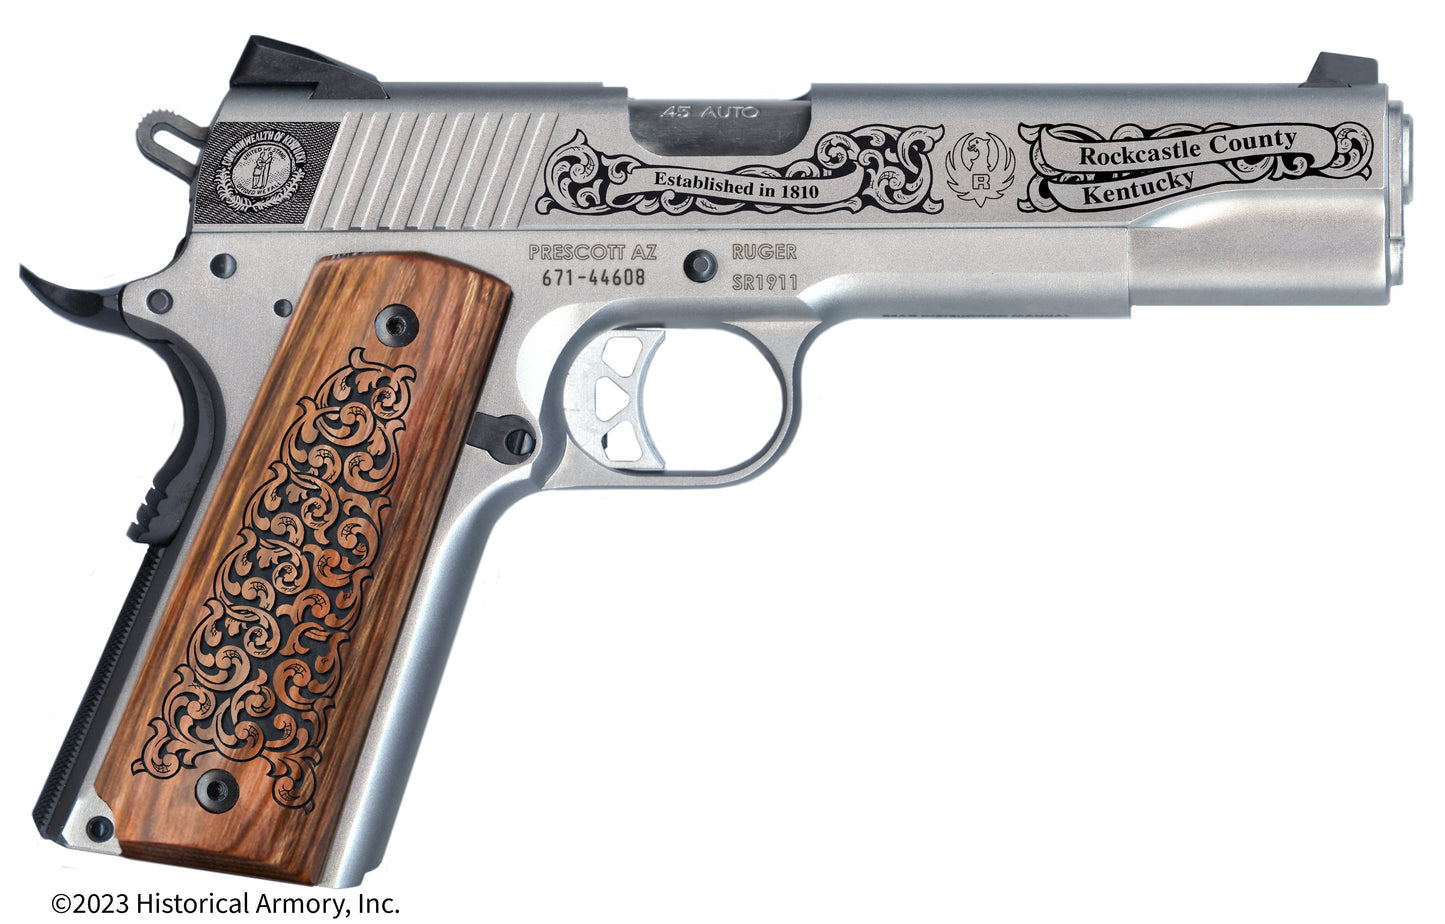 Rockcastle County Kentucky Engraved .45 Auto Ruger 1911